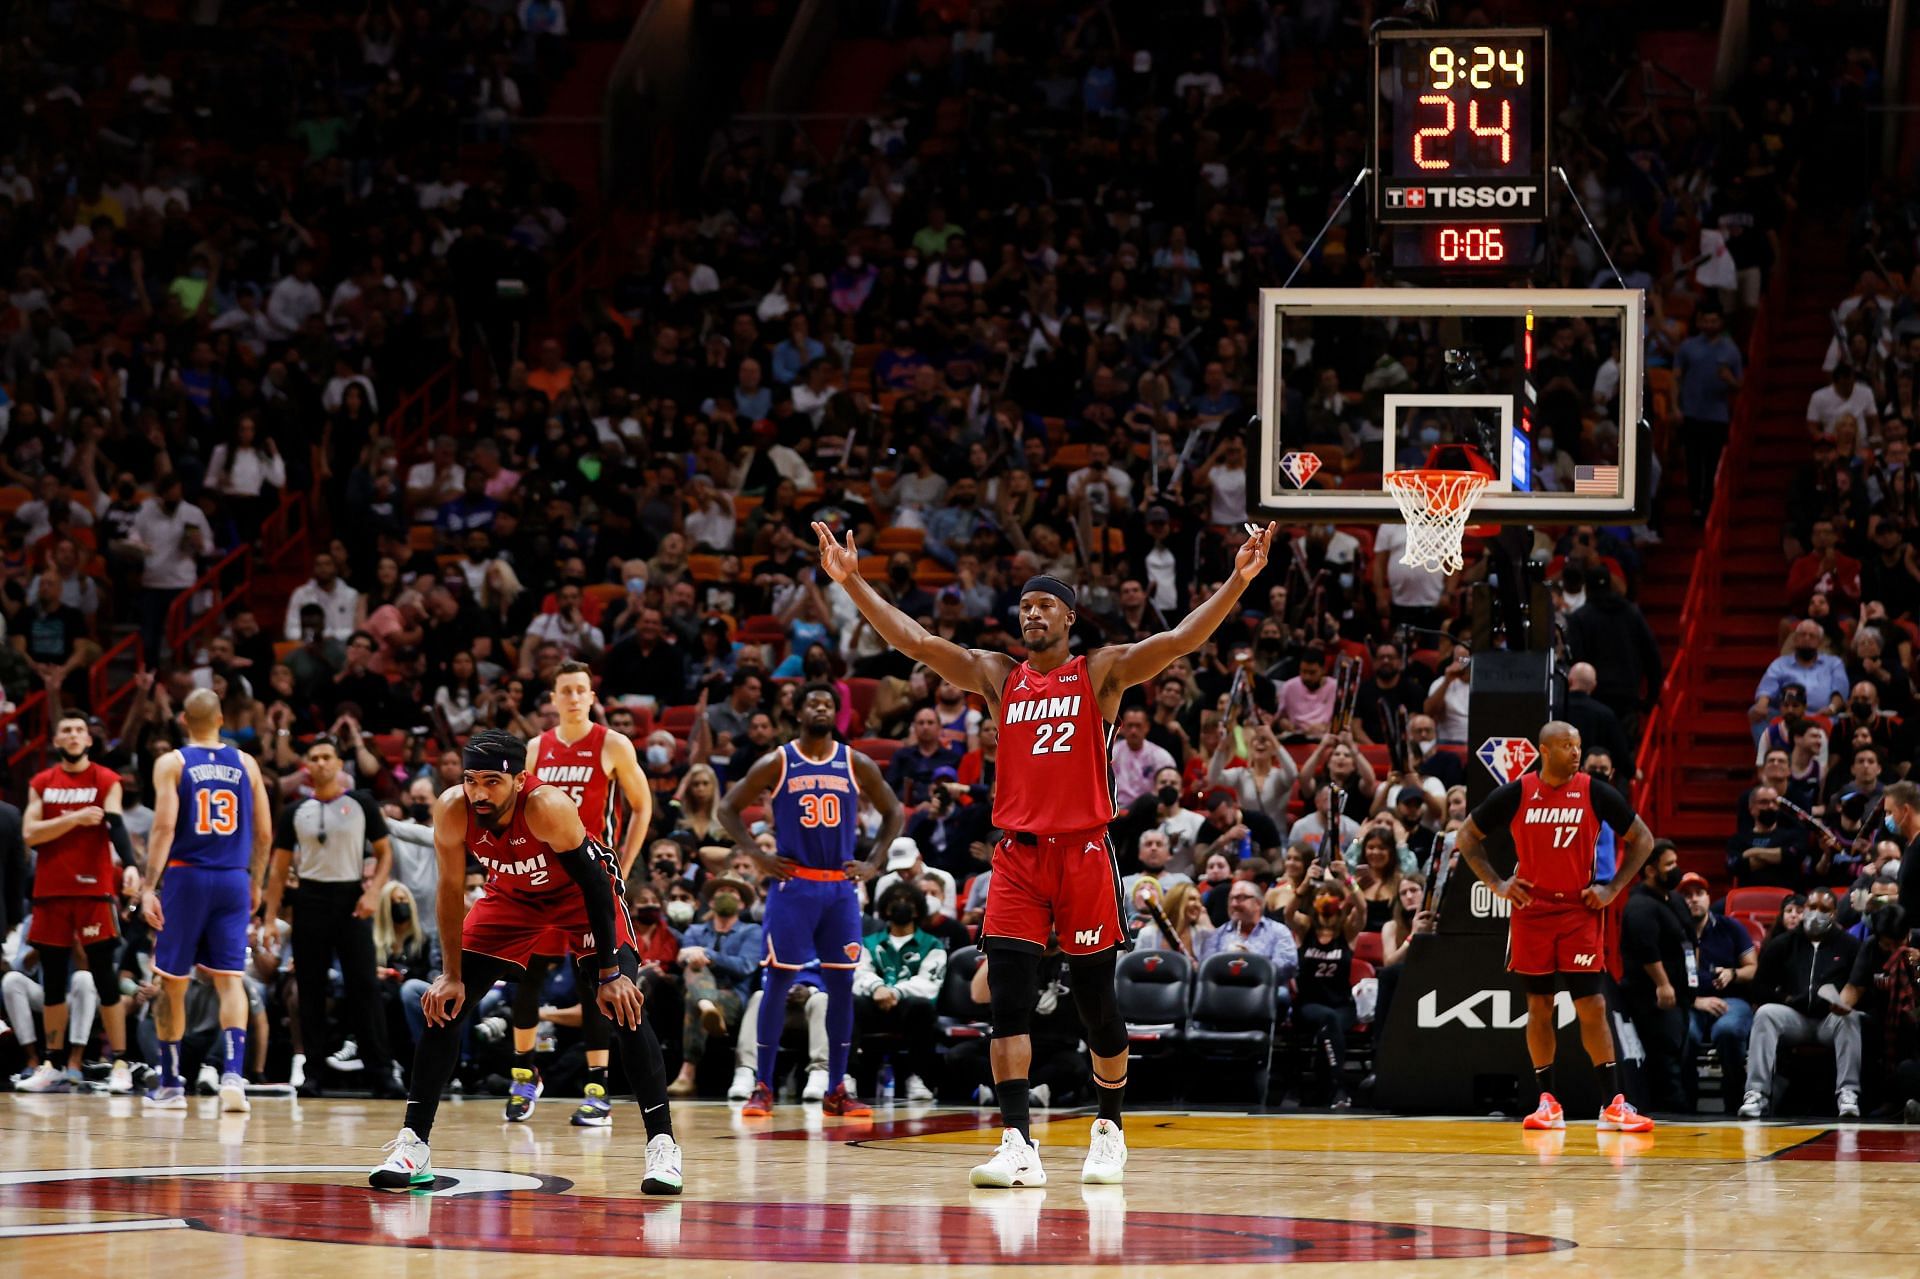 Jimmy Butler (#22) of the Miami Heat celebrates against the New York Knicks